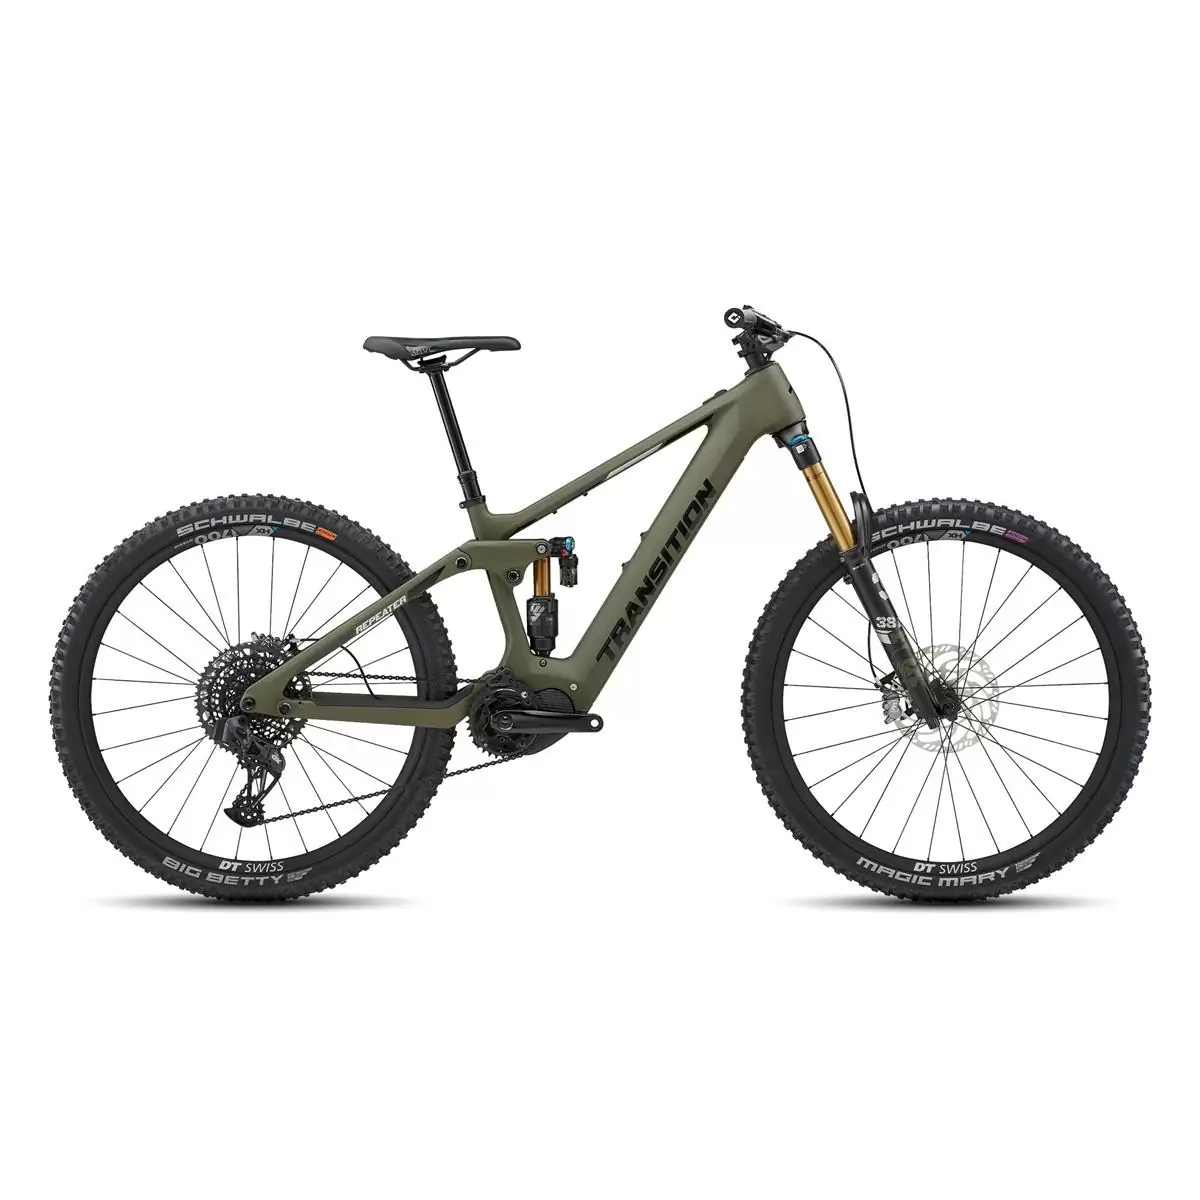 Repeater Carbon AXS 29'' 160mm 12s 630Wh Shimano EP8 Mossy Green Size M - image